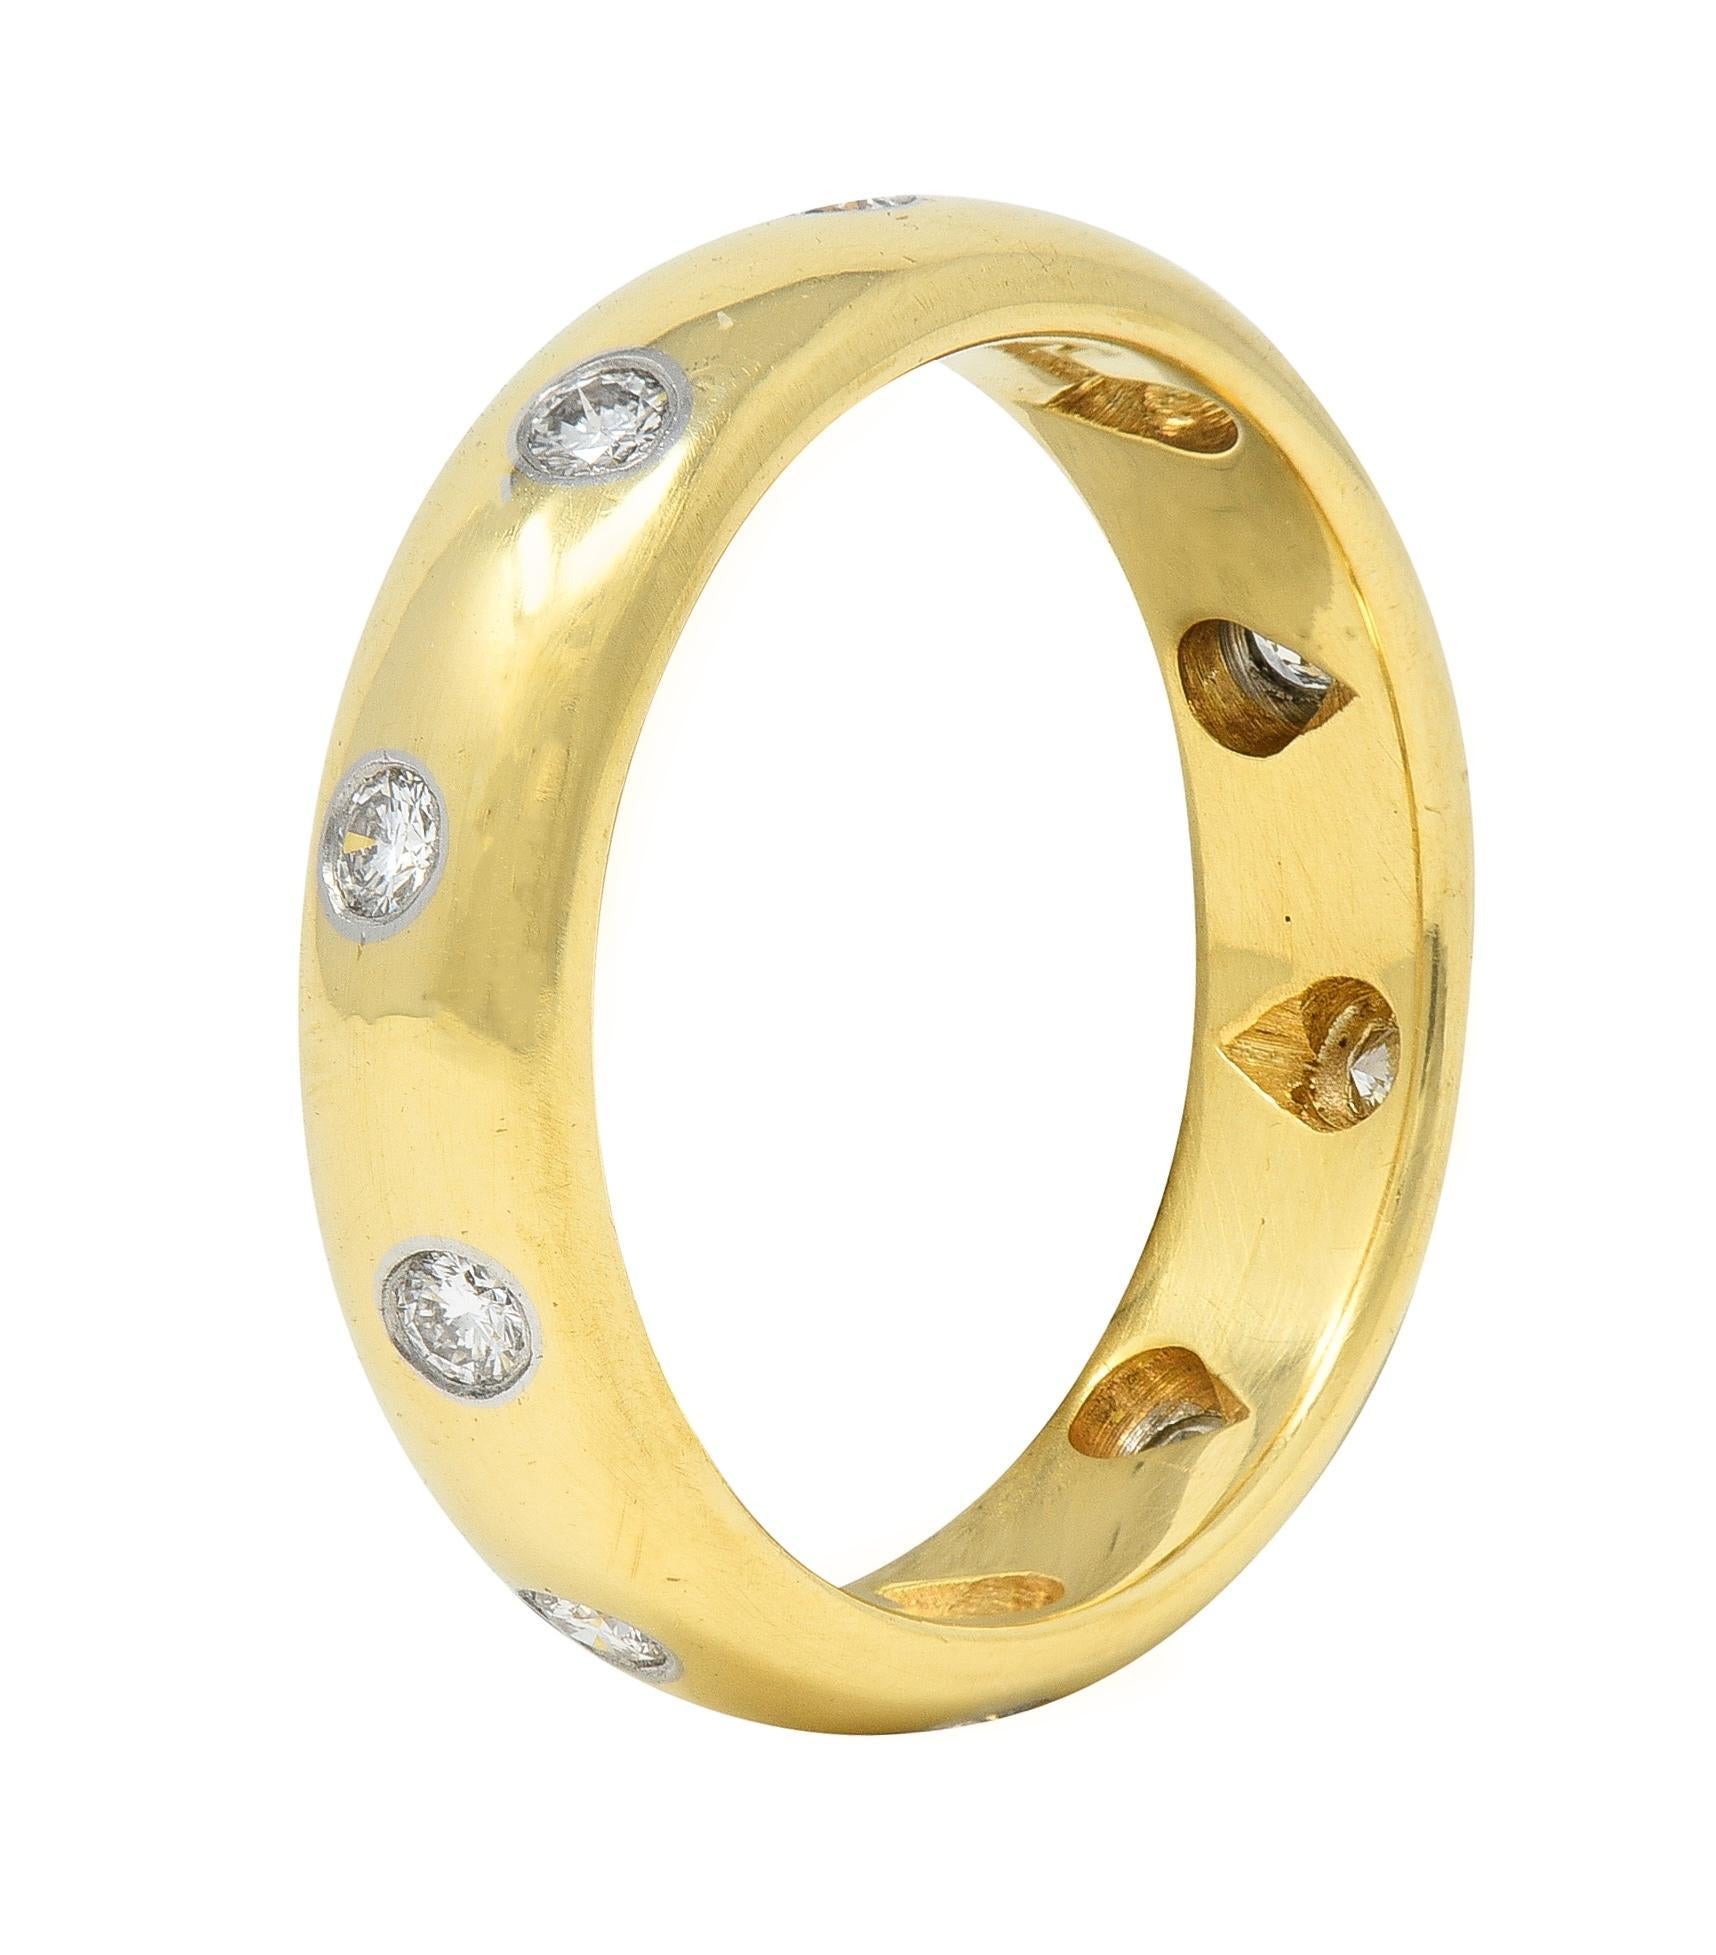 Designed as a curved yellow gold band with round brilliant cut diamonds 
Weighing approximately 0.30 carat total - G color with VS1 clarity
Flush set in platinum sporadically throughout 
Completed by high polish finish
Stamped for 18 karat gold and